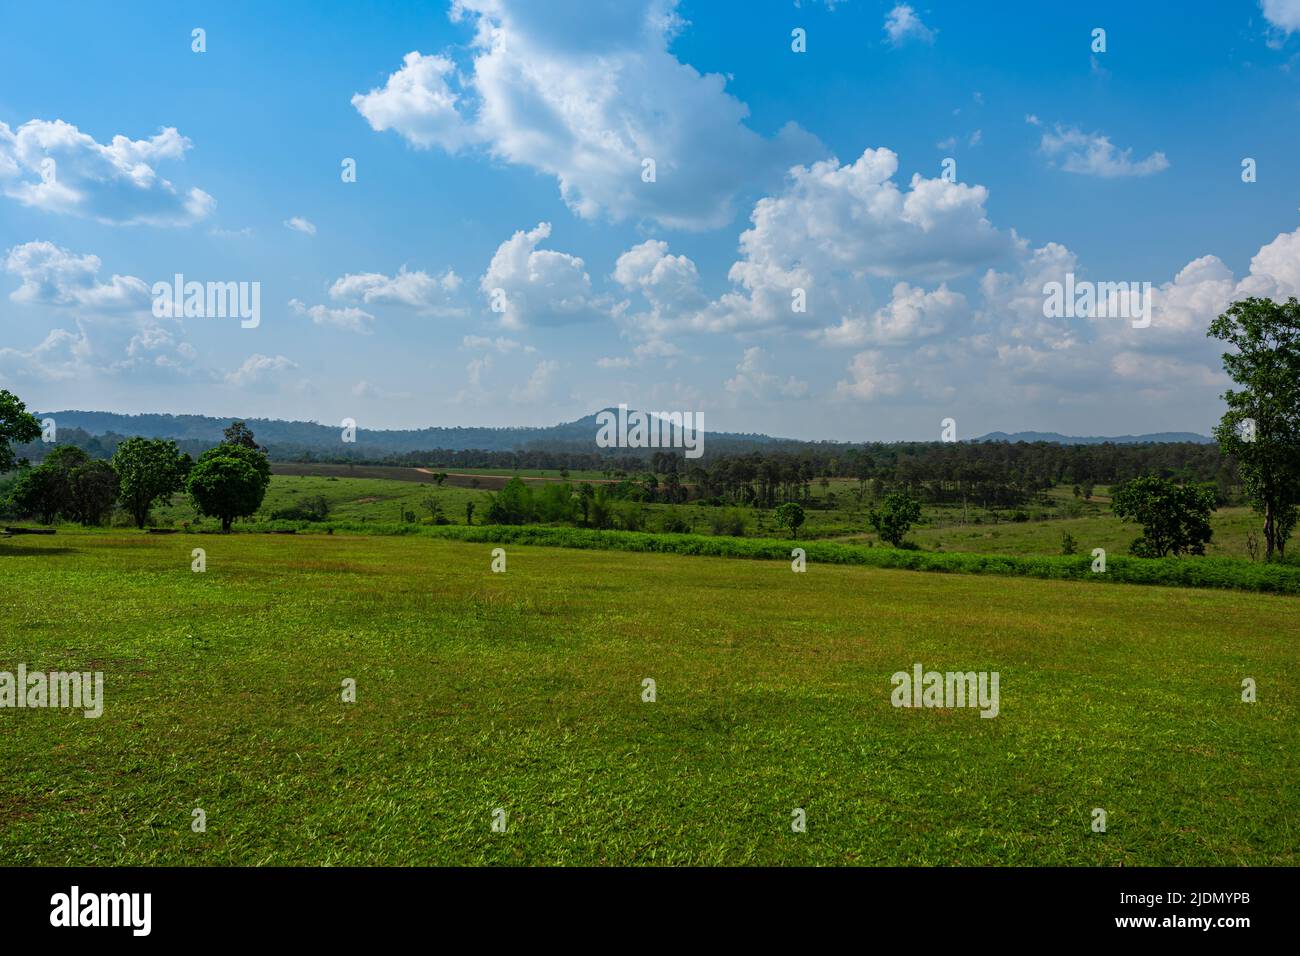 Green grass field and blue sky clouds background. Countryside landscape. Stock Photo